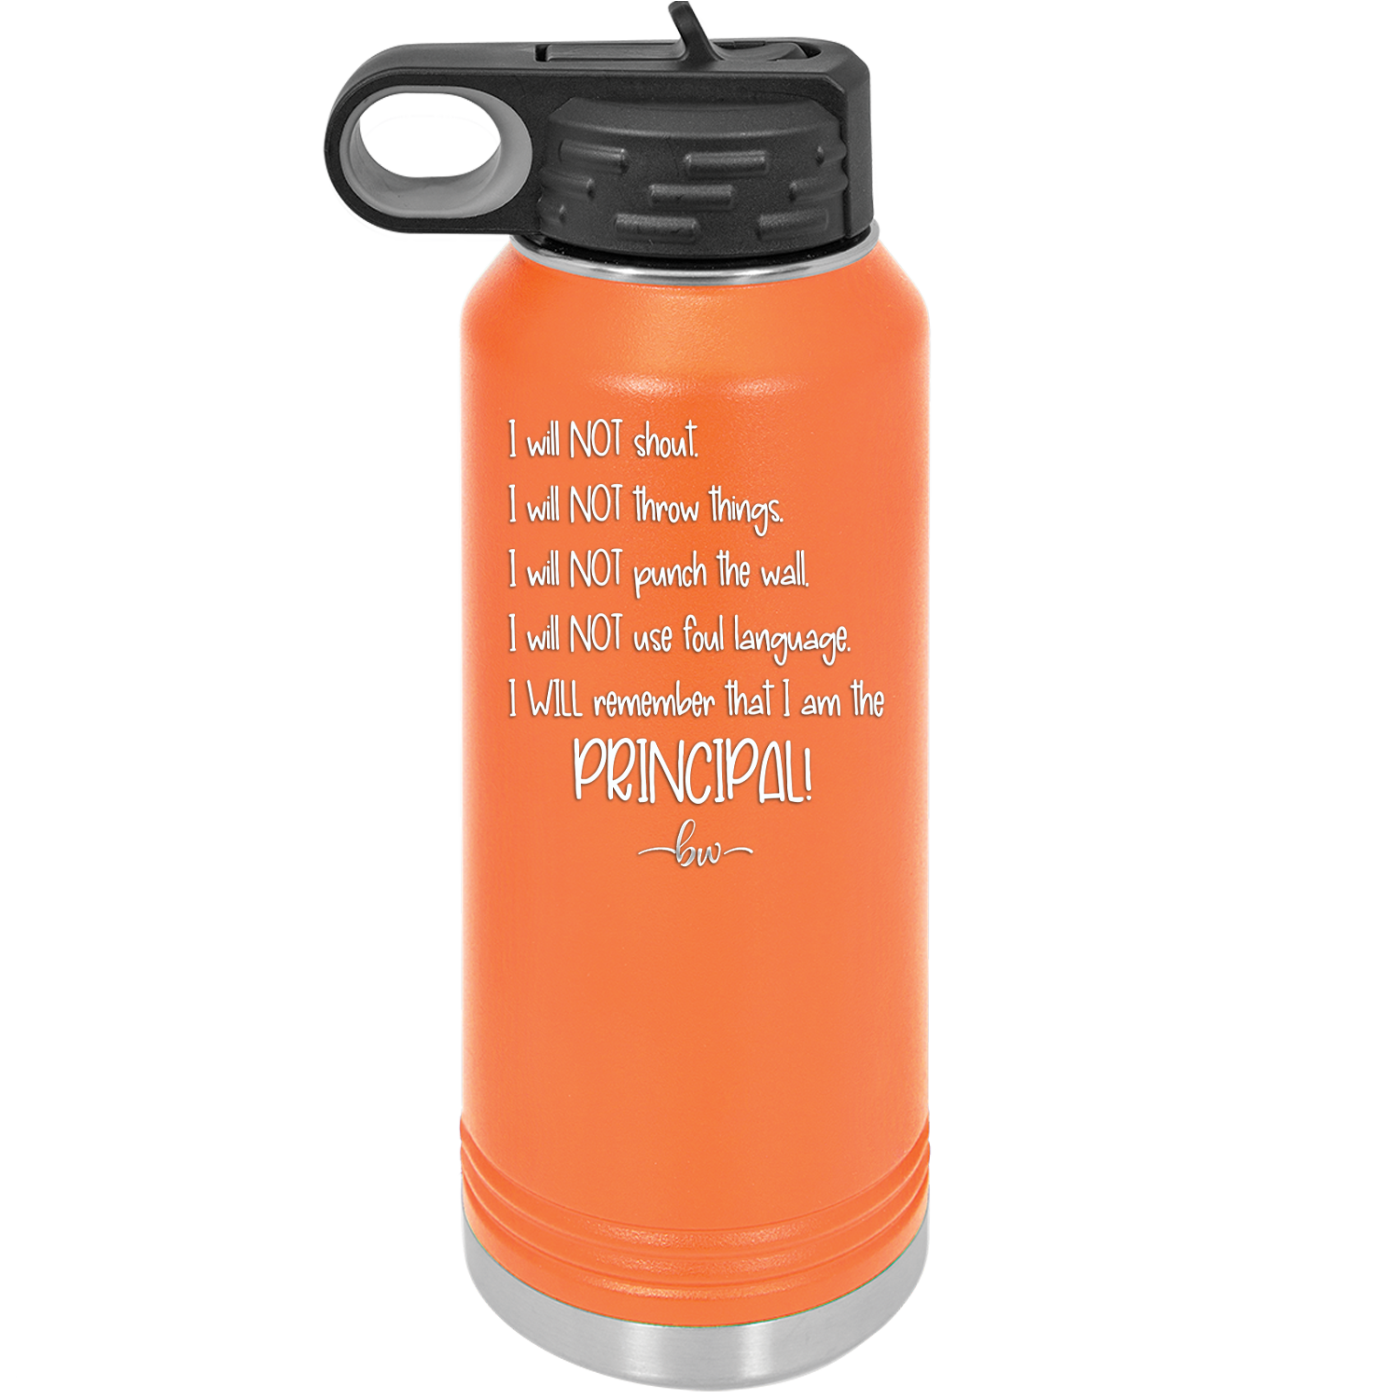 I Will Not Throw Things, I am the Principal - Laser Engraved Stainless Steel Drinkware - 1558 -